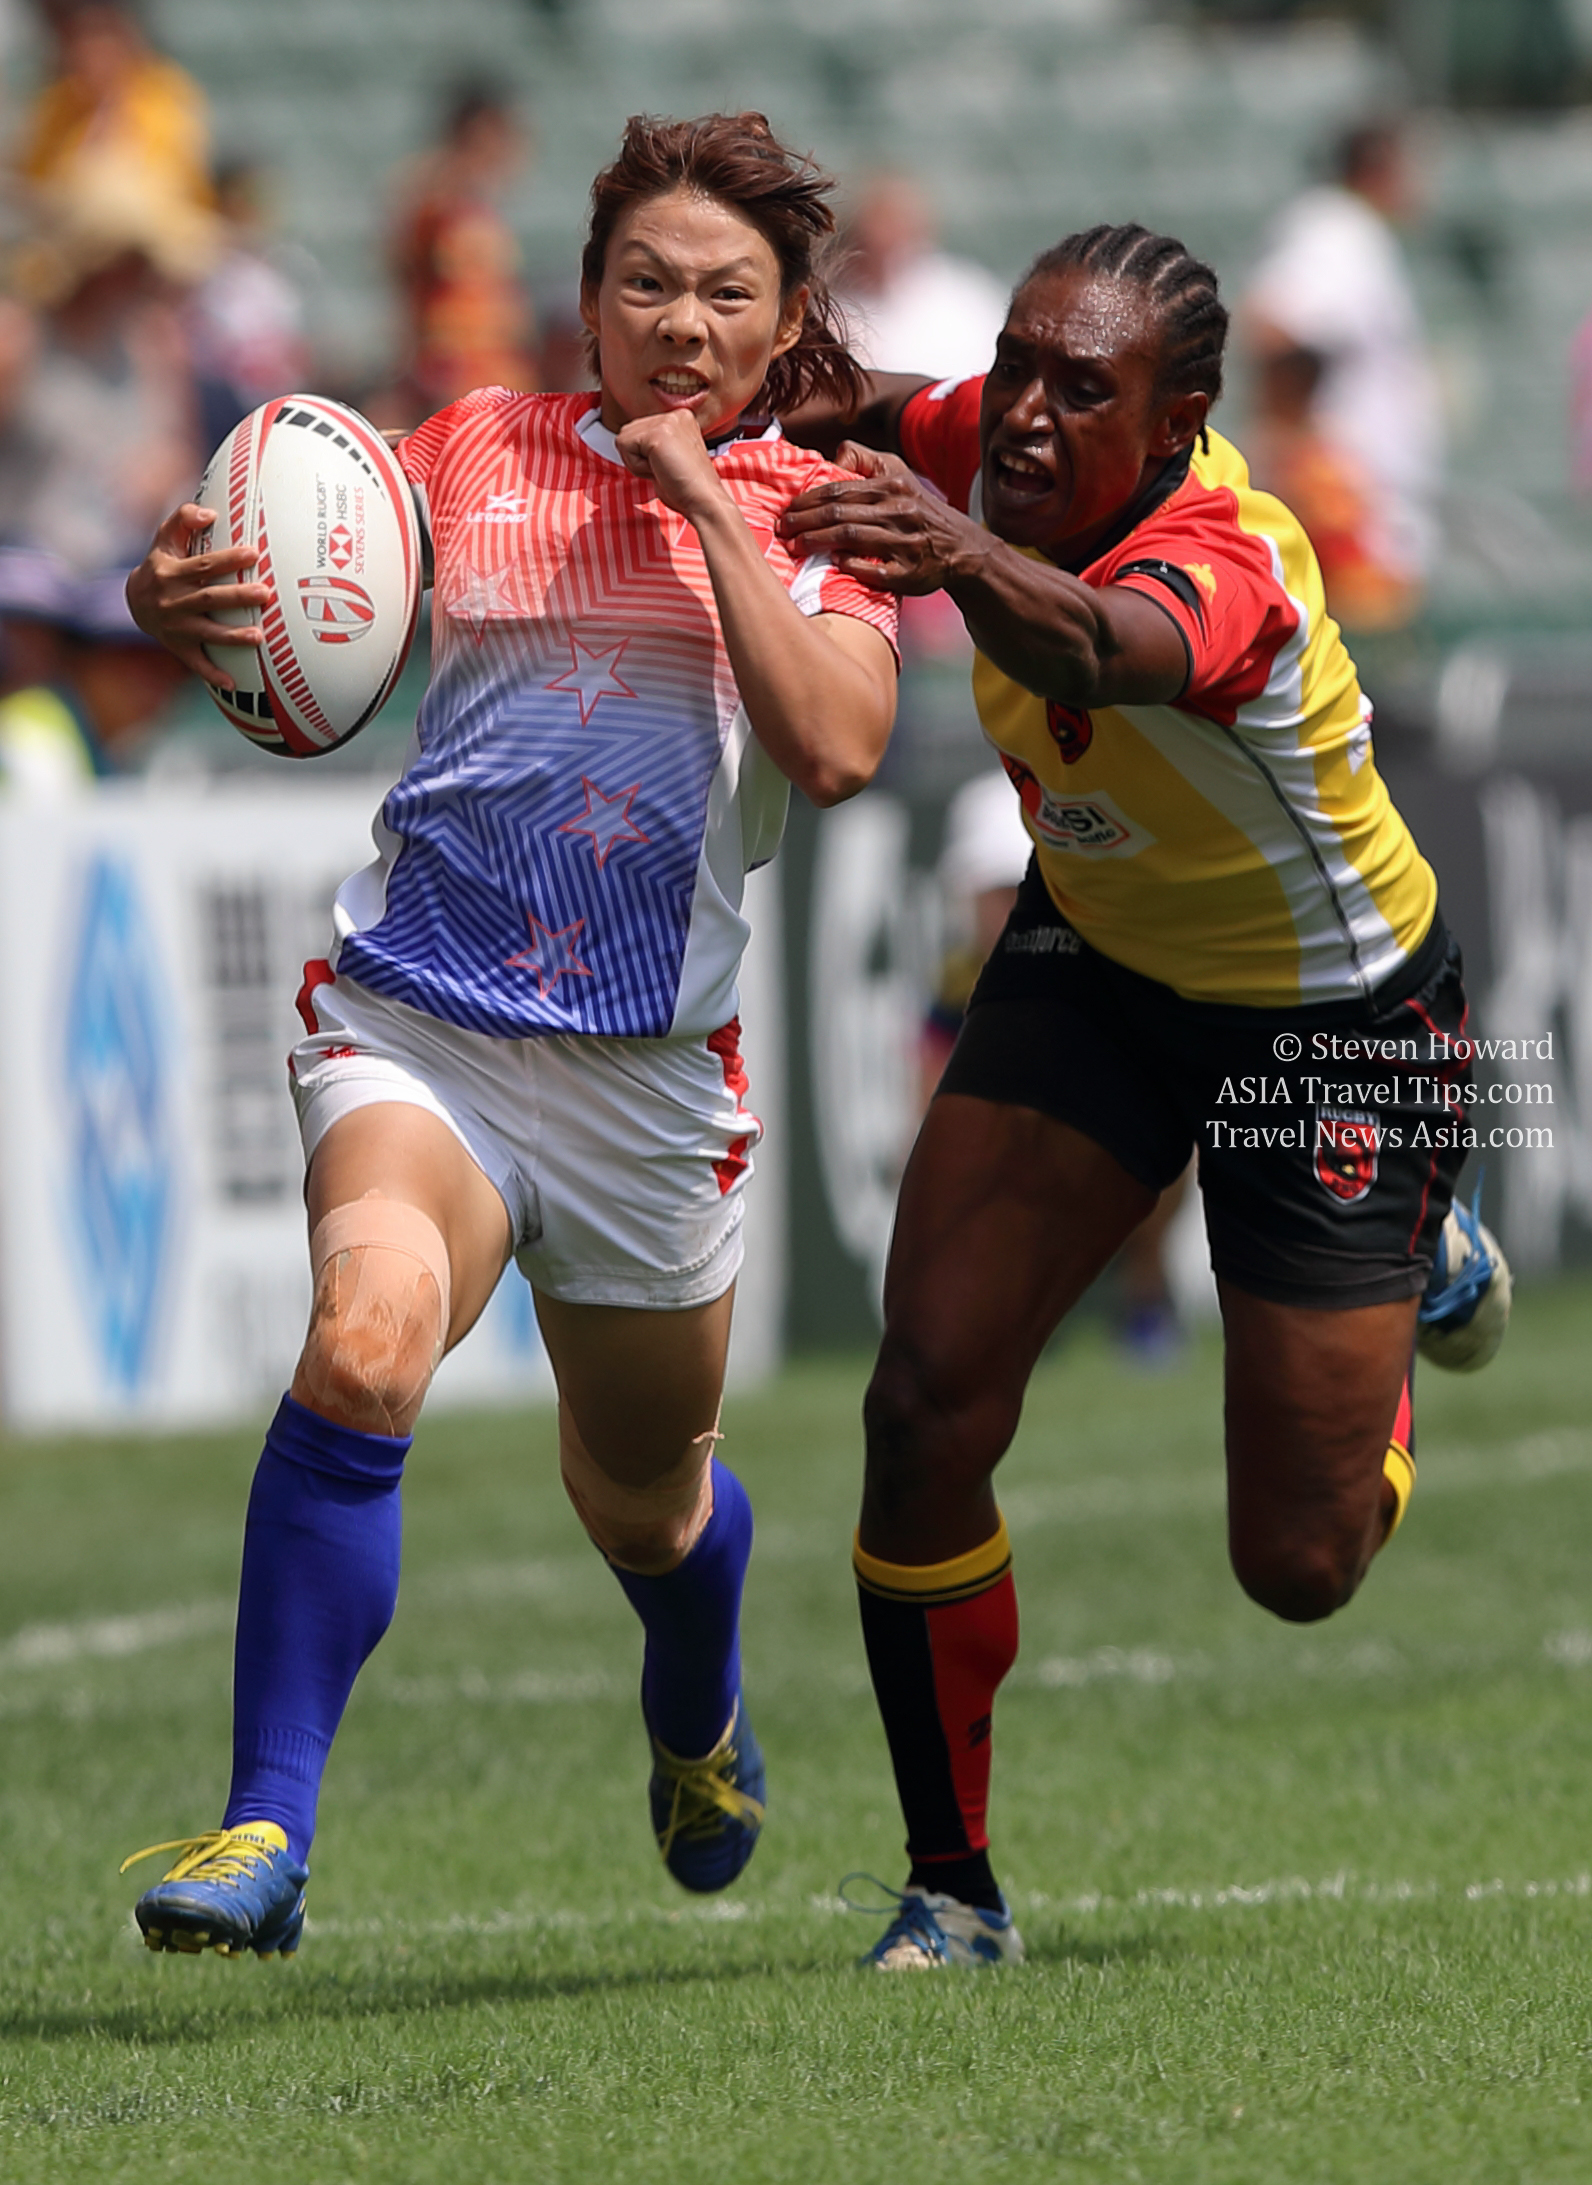 China women's rugby sevens team performed exceptionally well at the 2018 Cathay Pacific / HSBC Hong Kong Sevens. Picture by Steven Howard of TravelNewsAsia.com Click to enlarge.